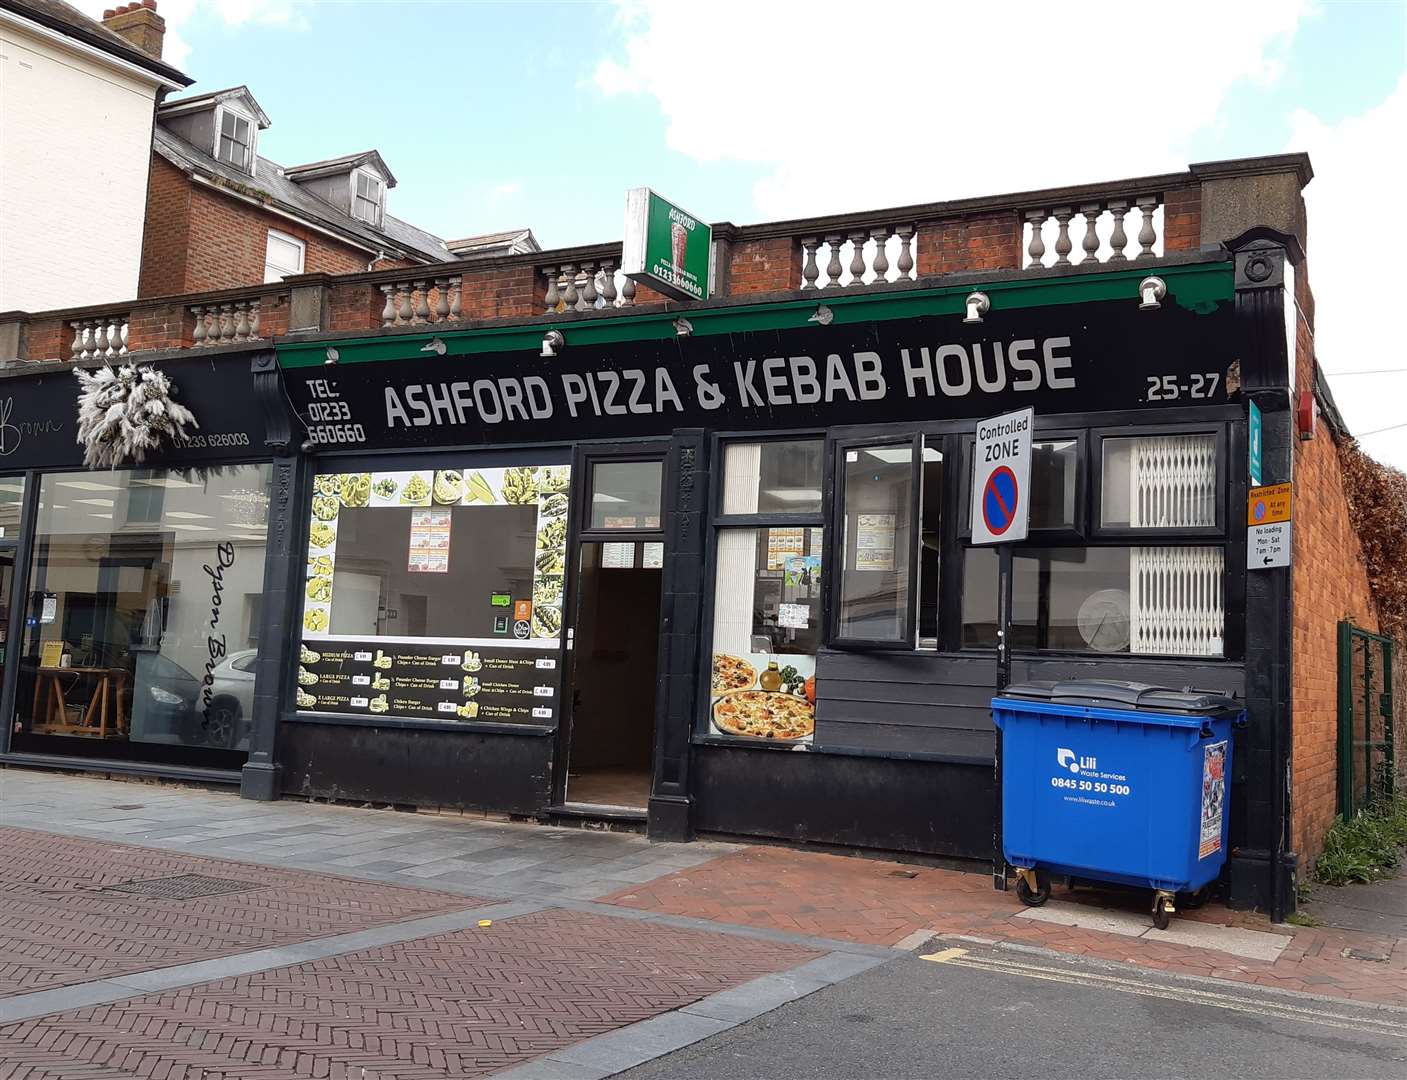 Caleb Shebioba admitted wounding with intent after stabbing a staff member at the Ashford Pizza and Kebab House in Tufton Street in August 2021